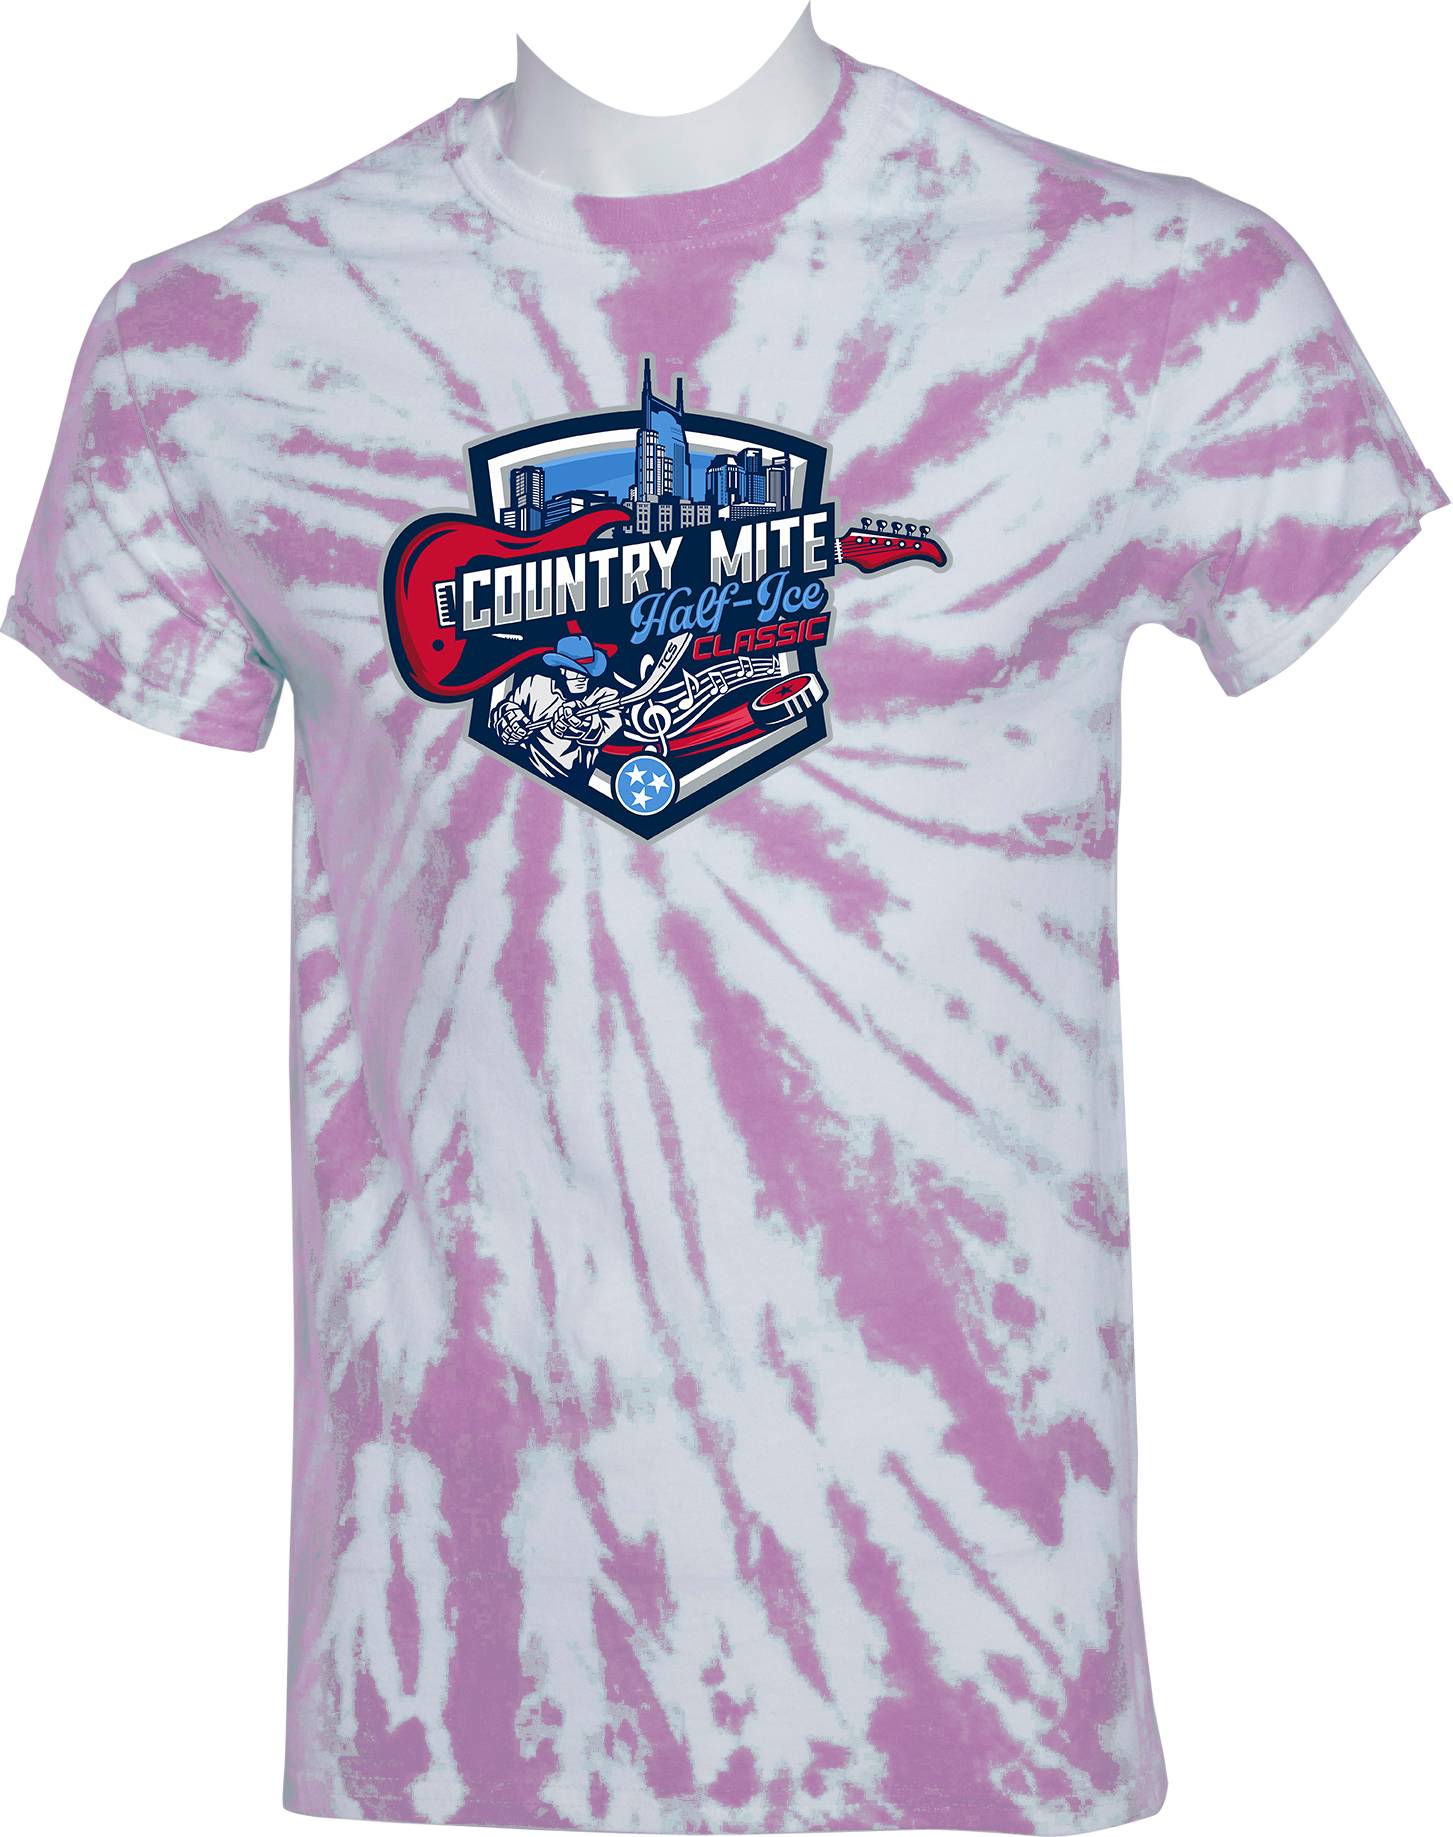 TIE-DYE SHORT SLEEVES - 2023 Country Mite Half-Ice Classic